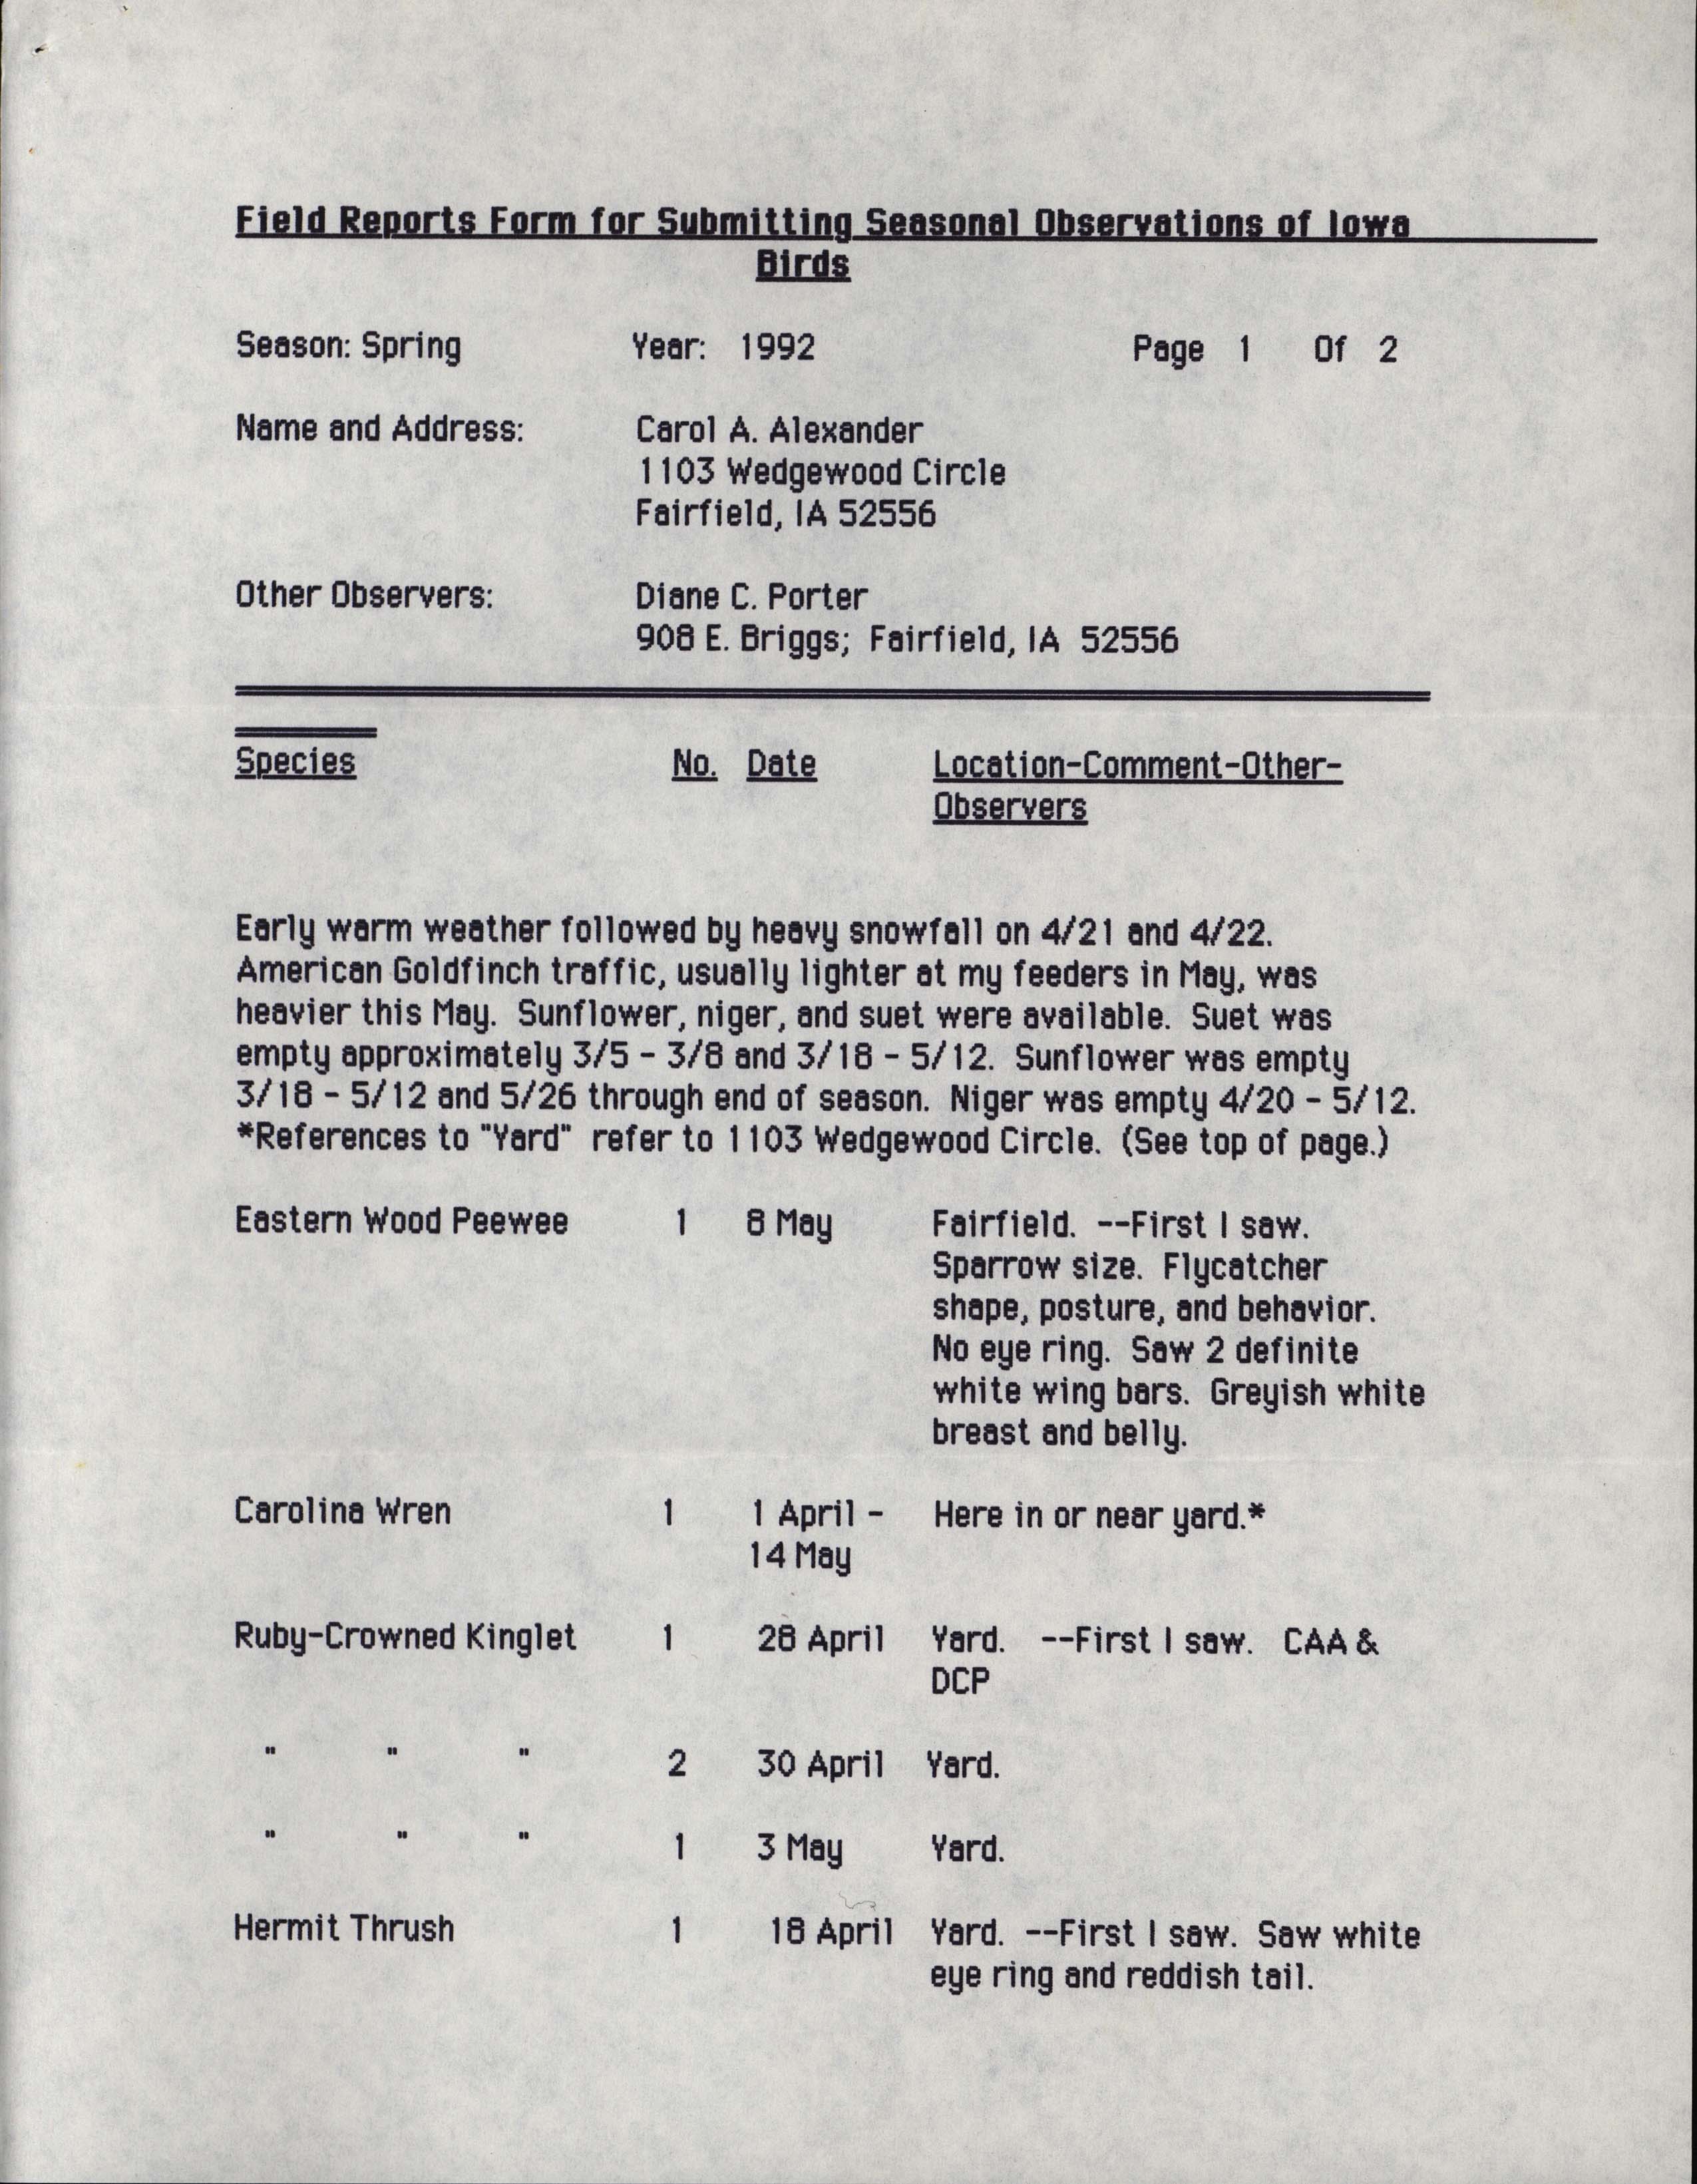 Field reports form for submitting seasonal observations of Iowa birds, Carol Ann Alexander, spring 1992